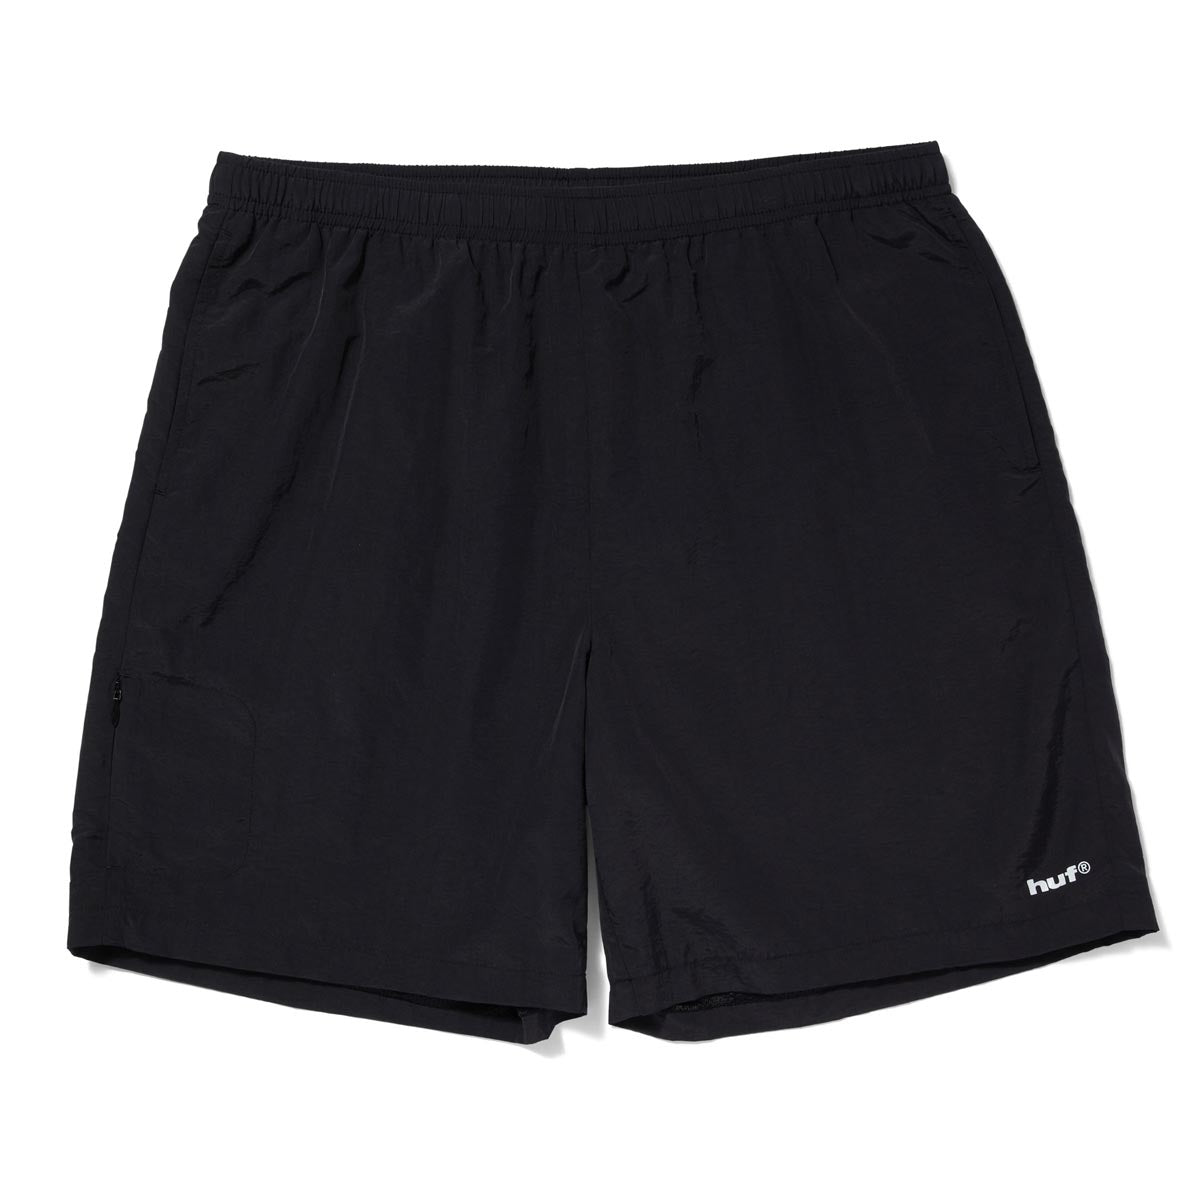 HUF Pacific Easy Shorts - Black image 1